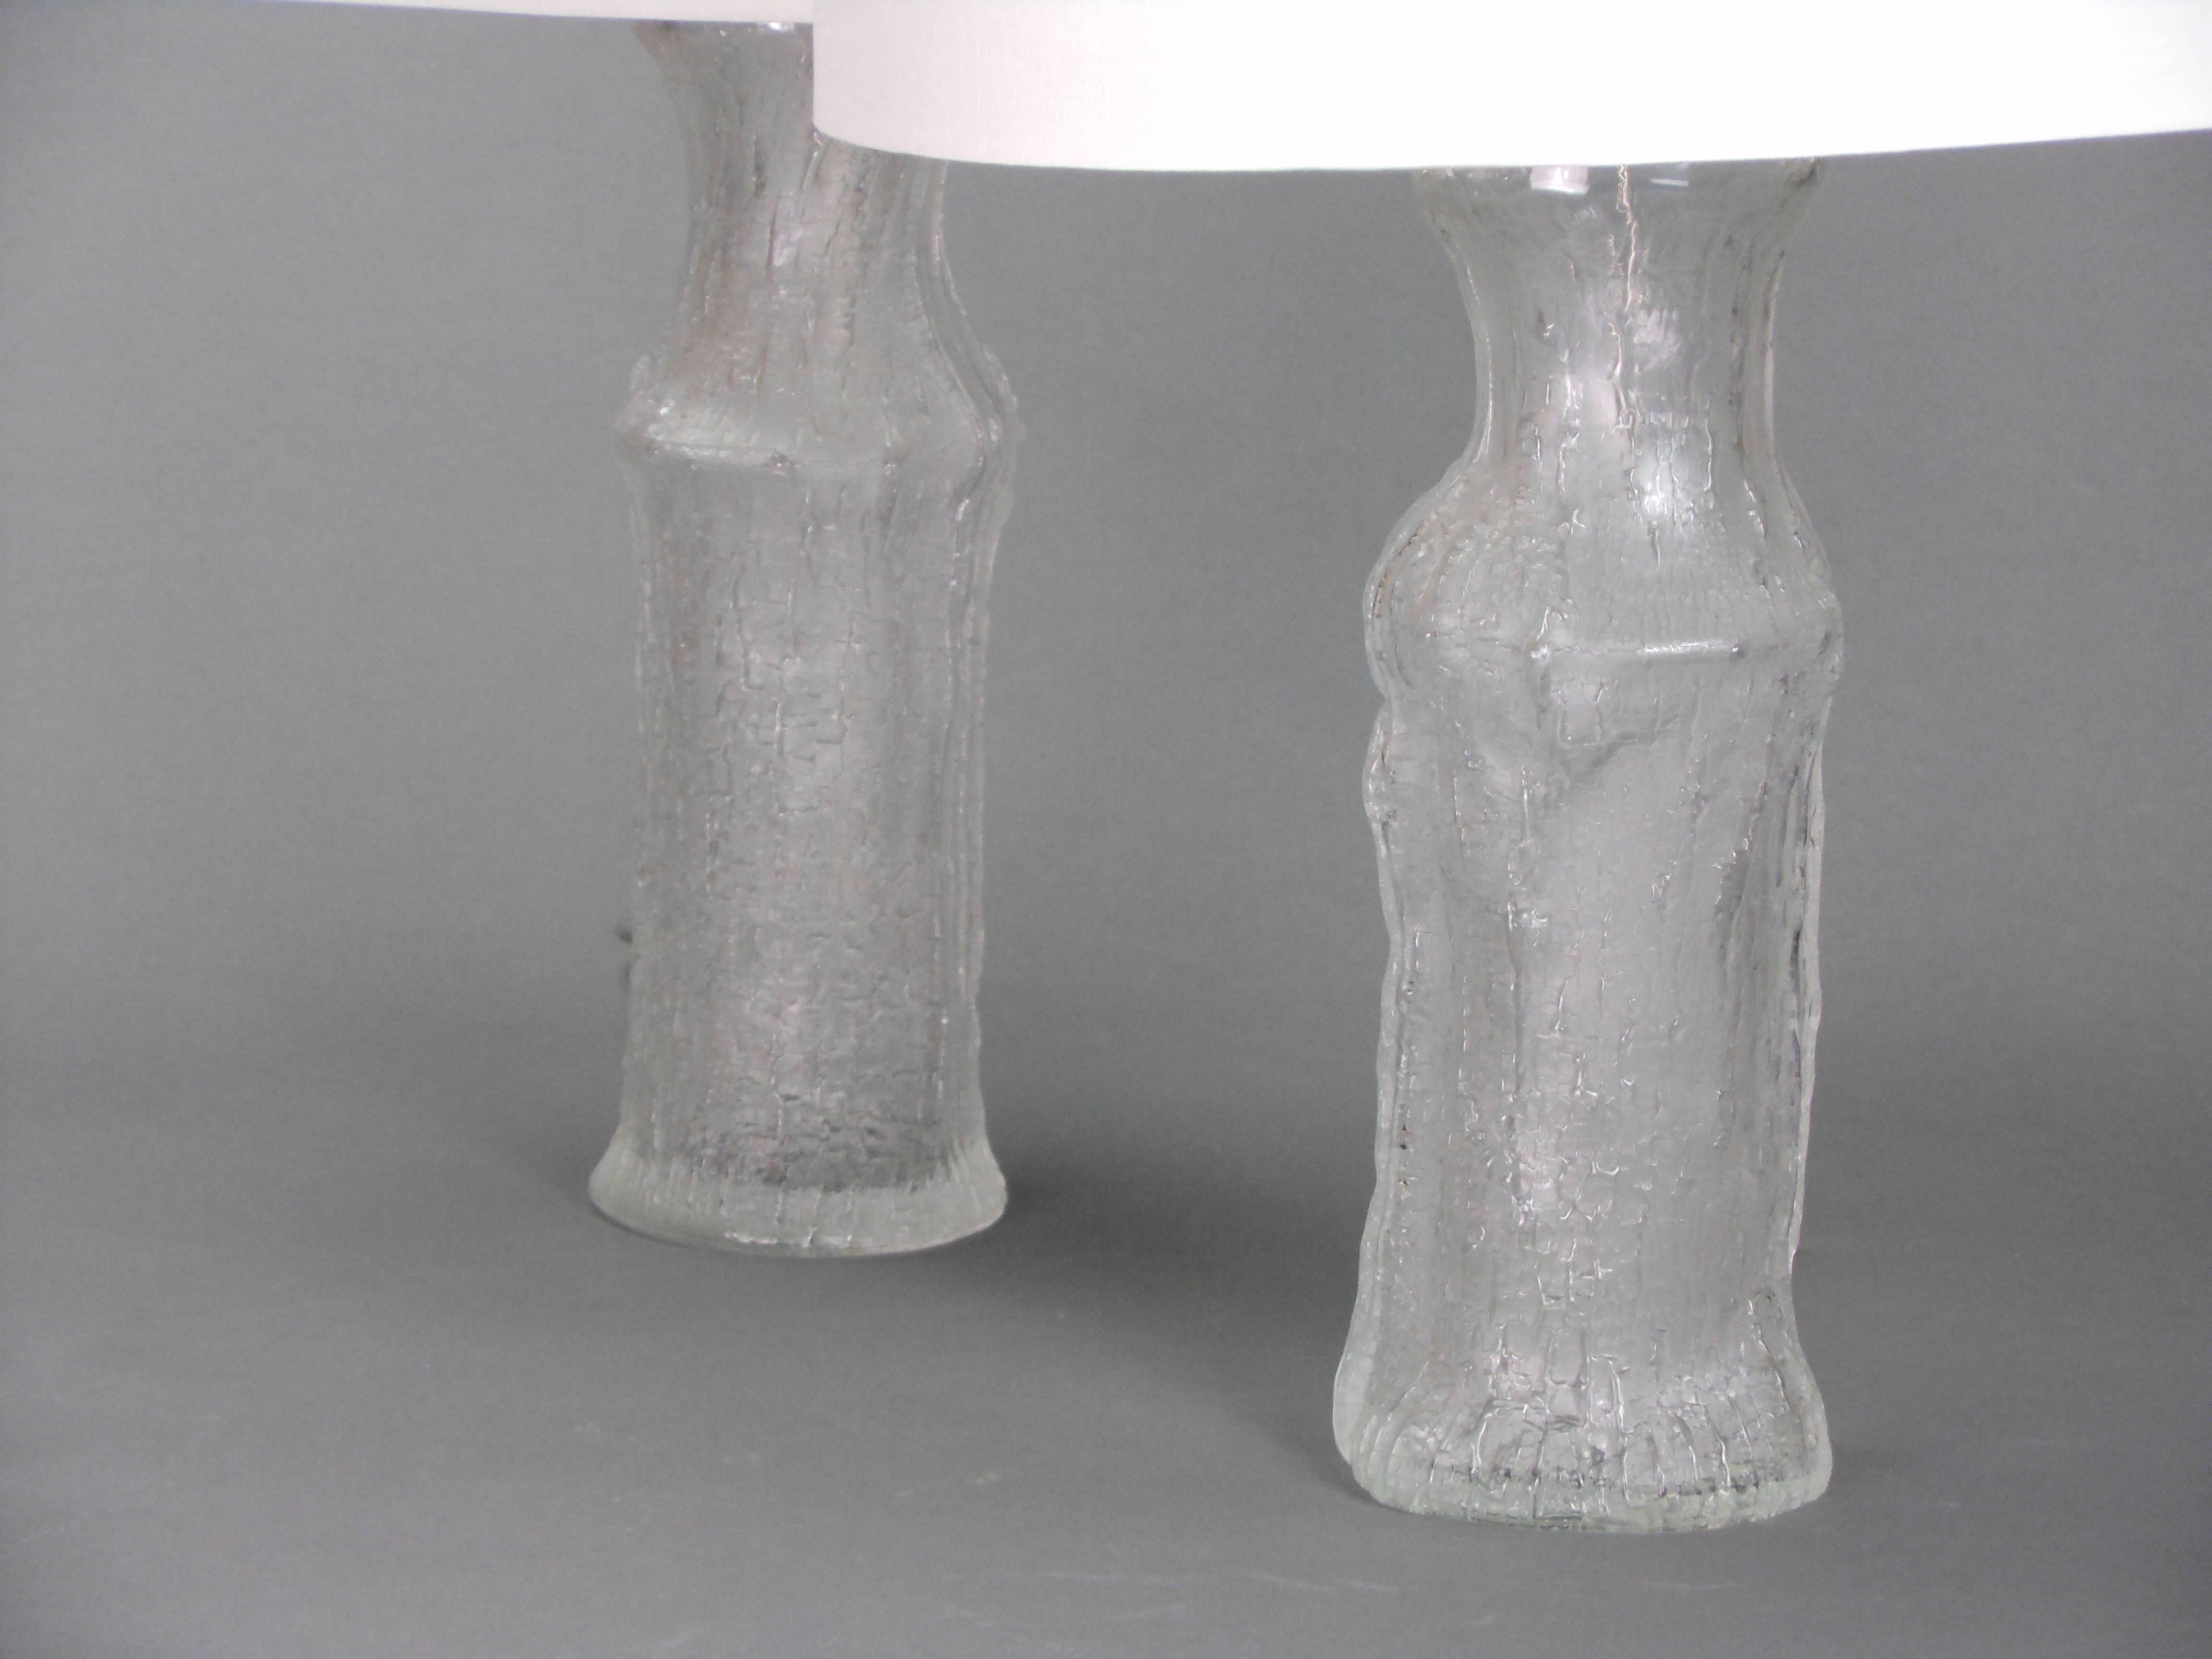 Timo Sarpaneva, pair of tree trunk form glass lamps.
Height to light socket: 12.5